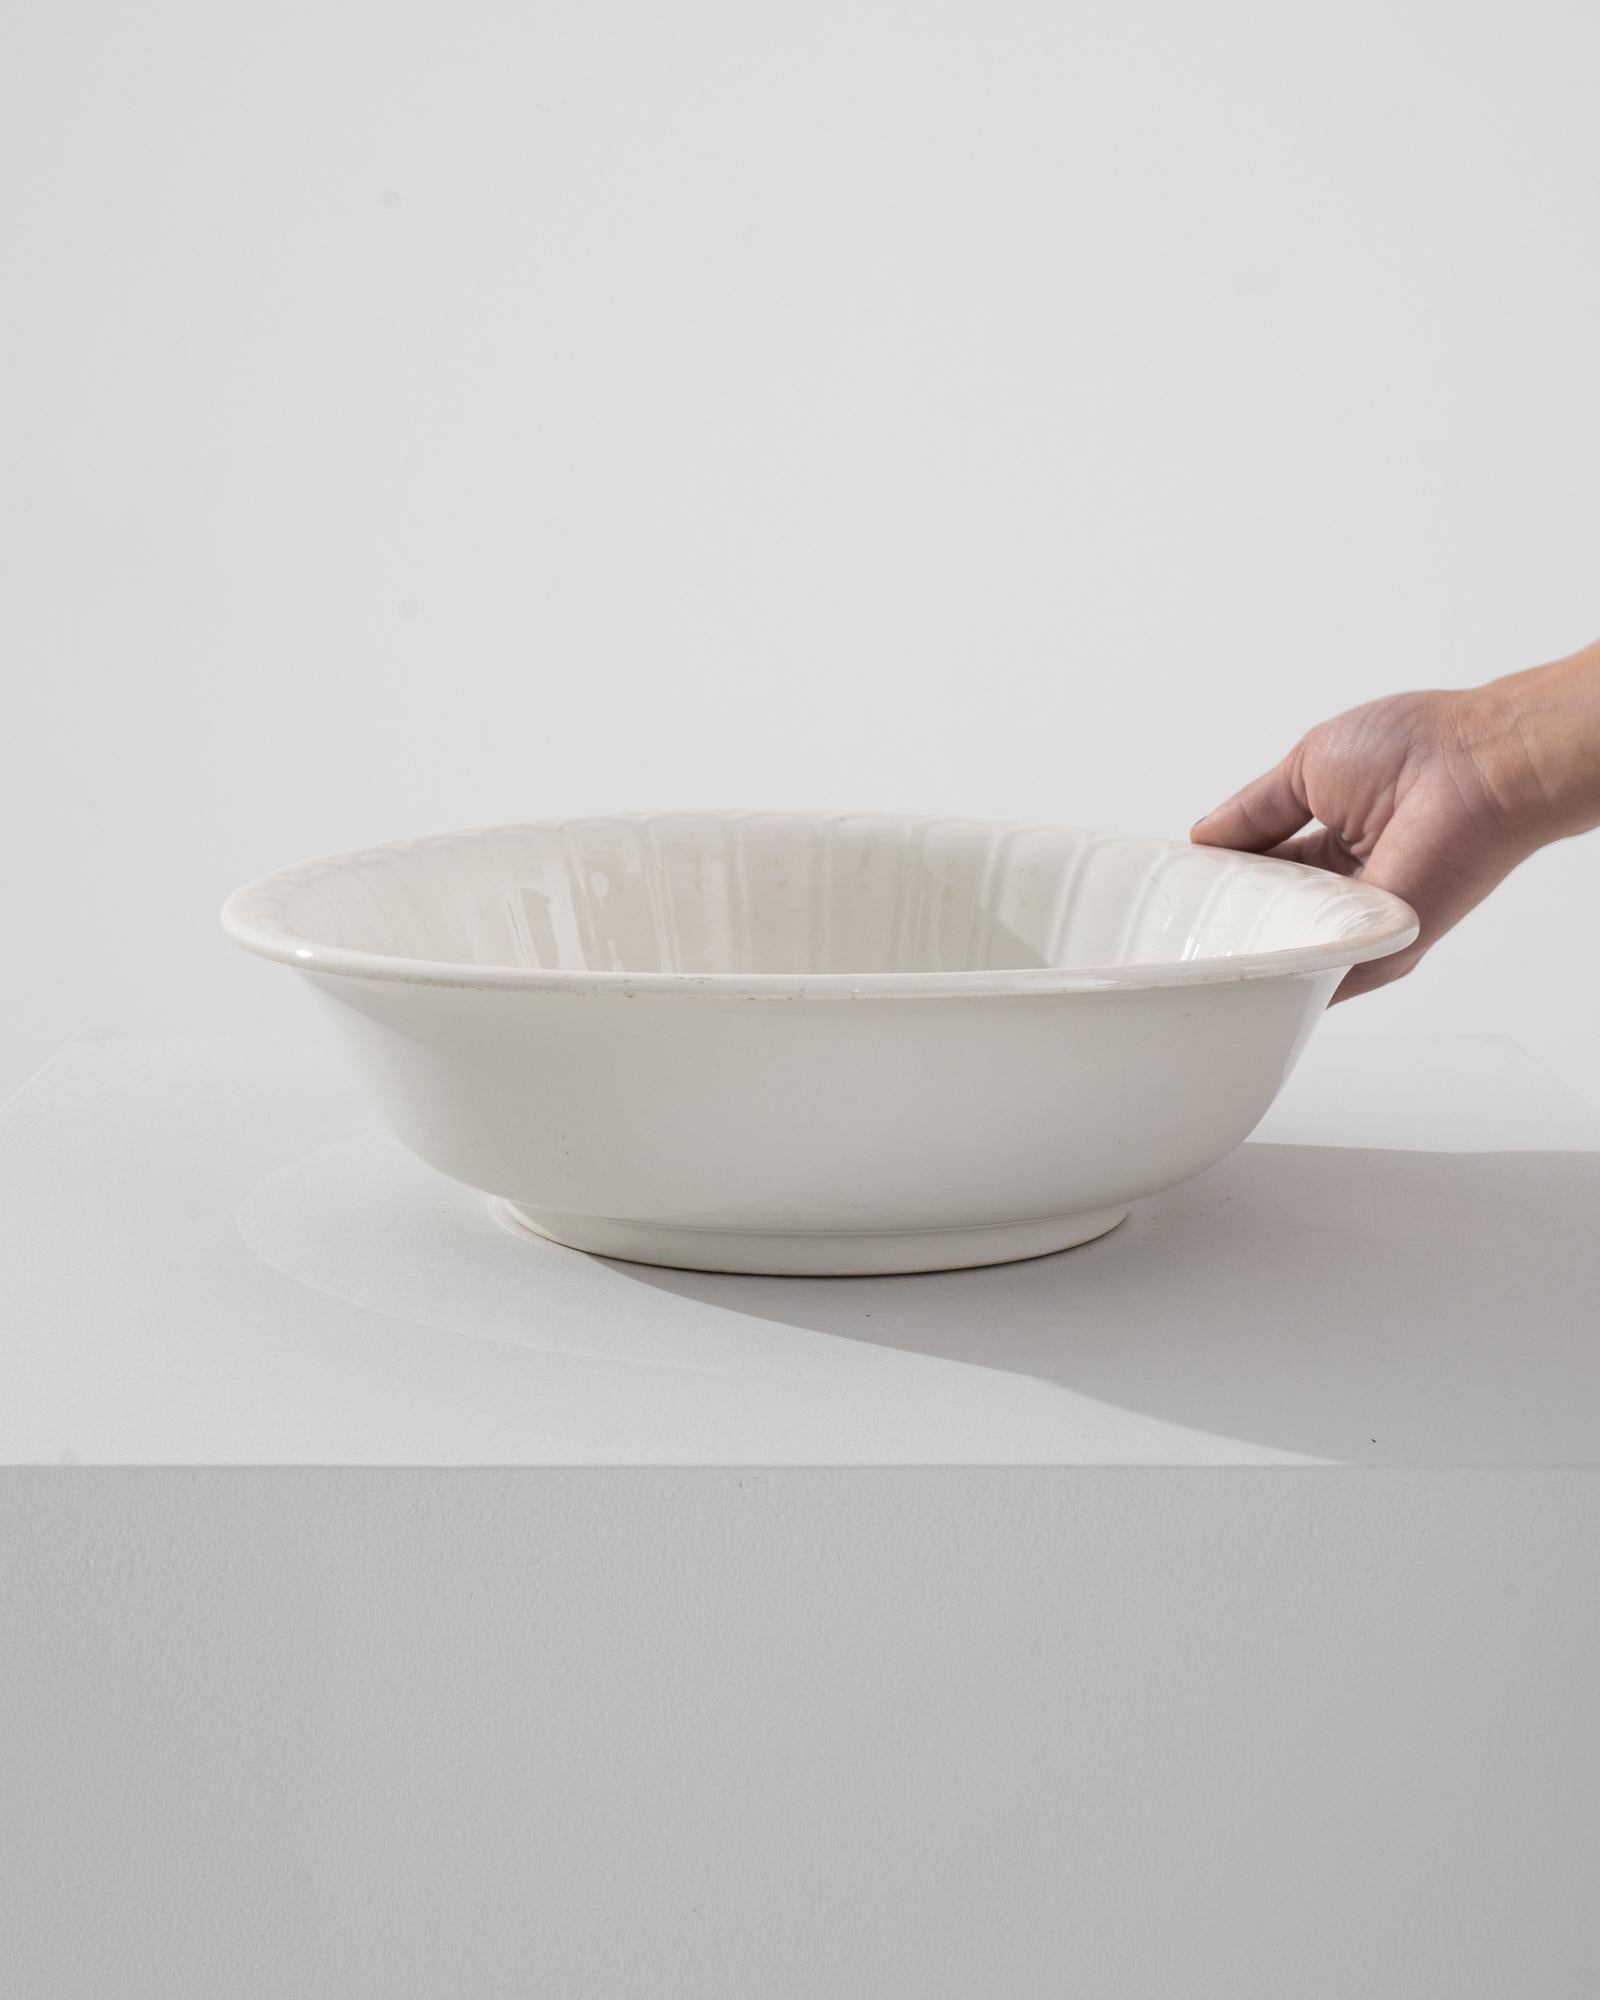 Embrace the understated elegance of the early 20th century with this 1900s Belgian Porcelain Salad Bowl. Crafted during a time of exquisite attention to detail, this porcelain piece exudes timeless grace with its classic white hue and delicate